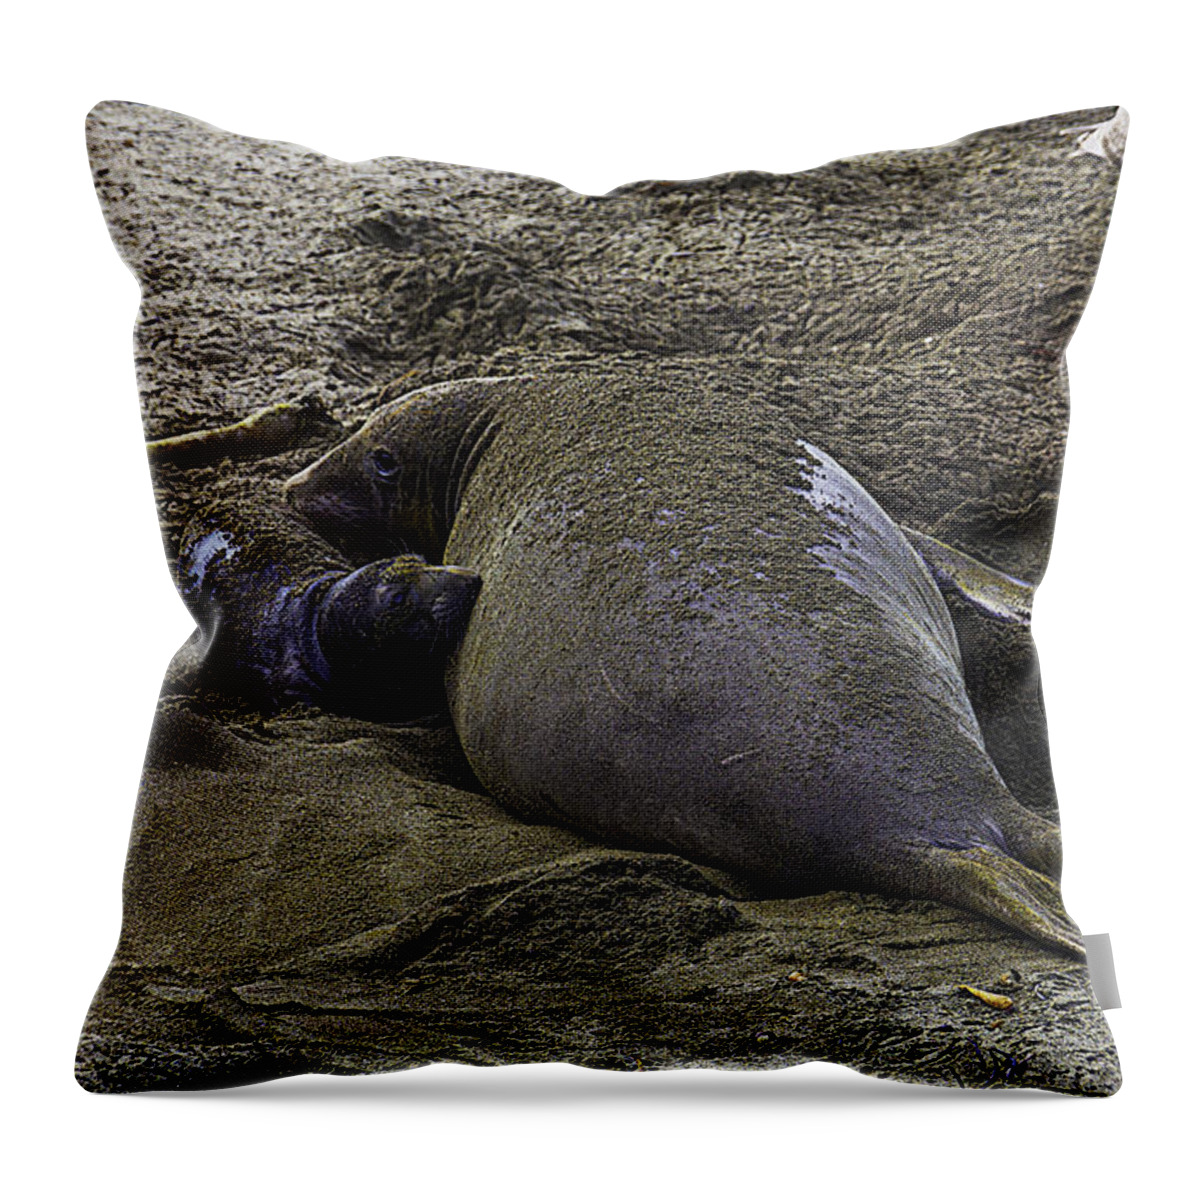 Elephant Throw Pillow featuring the photograph Mother And New Born by Garry Gay